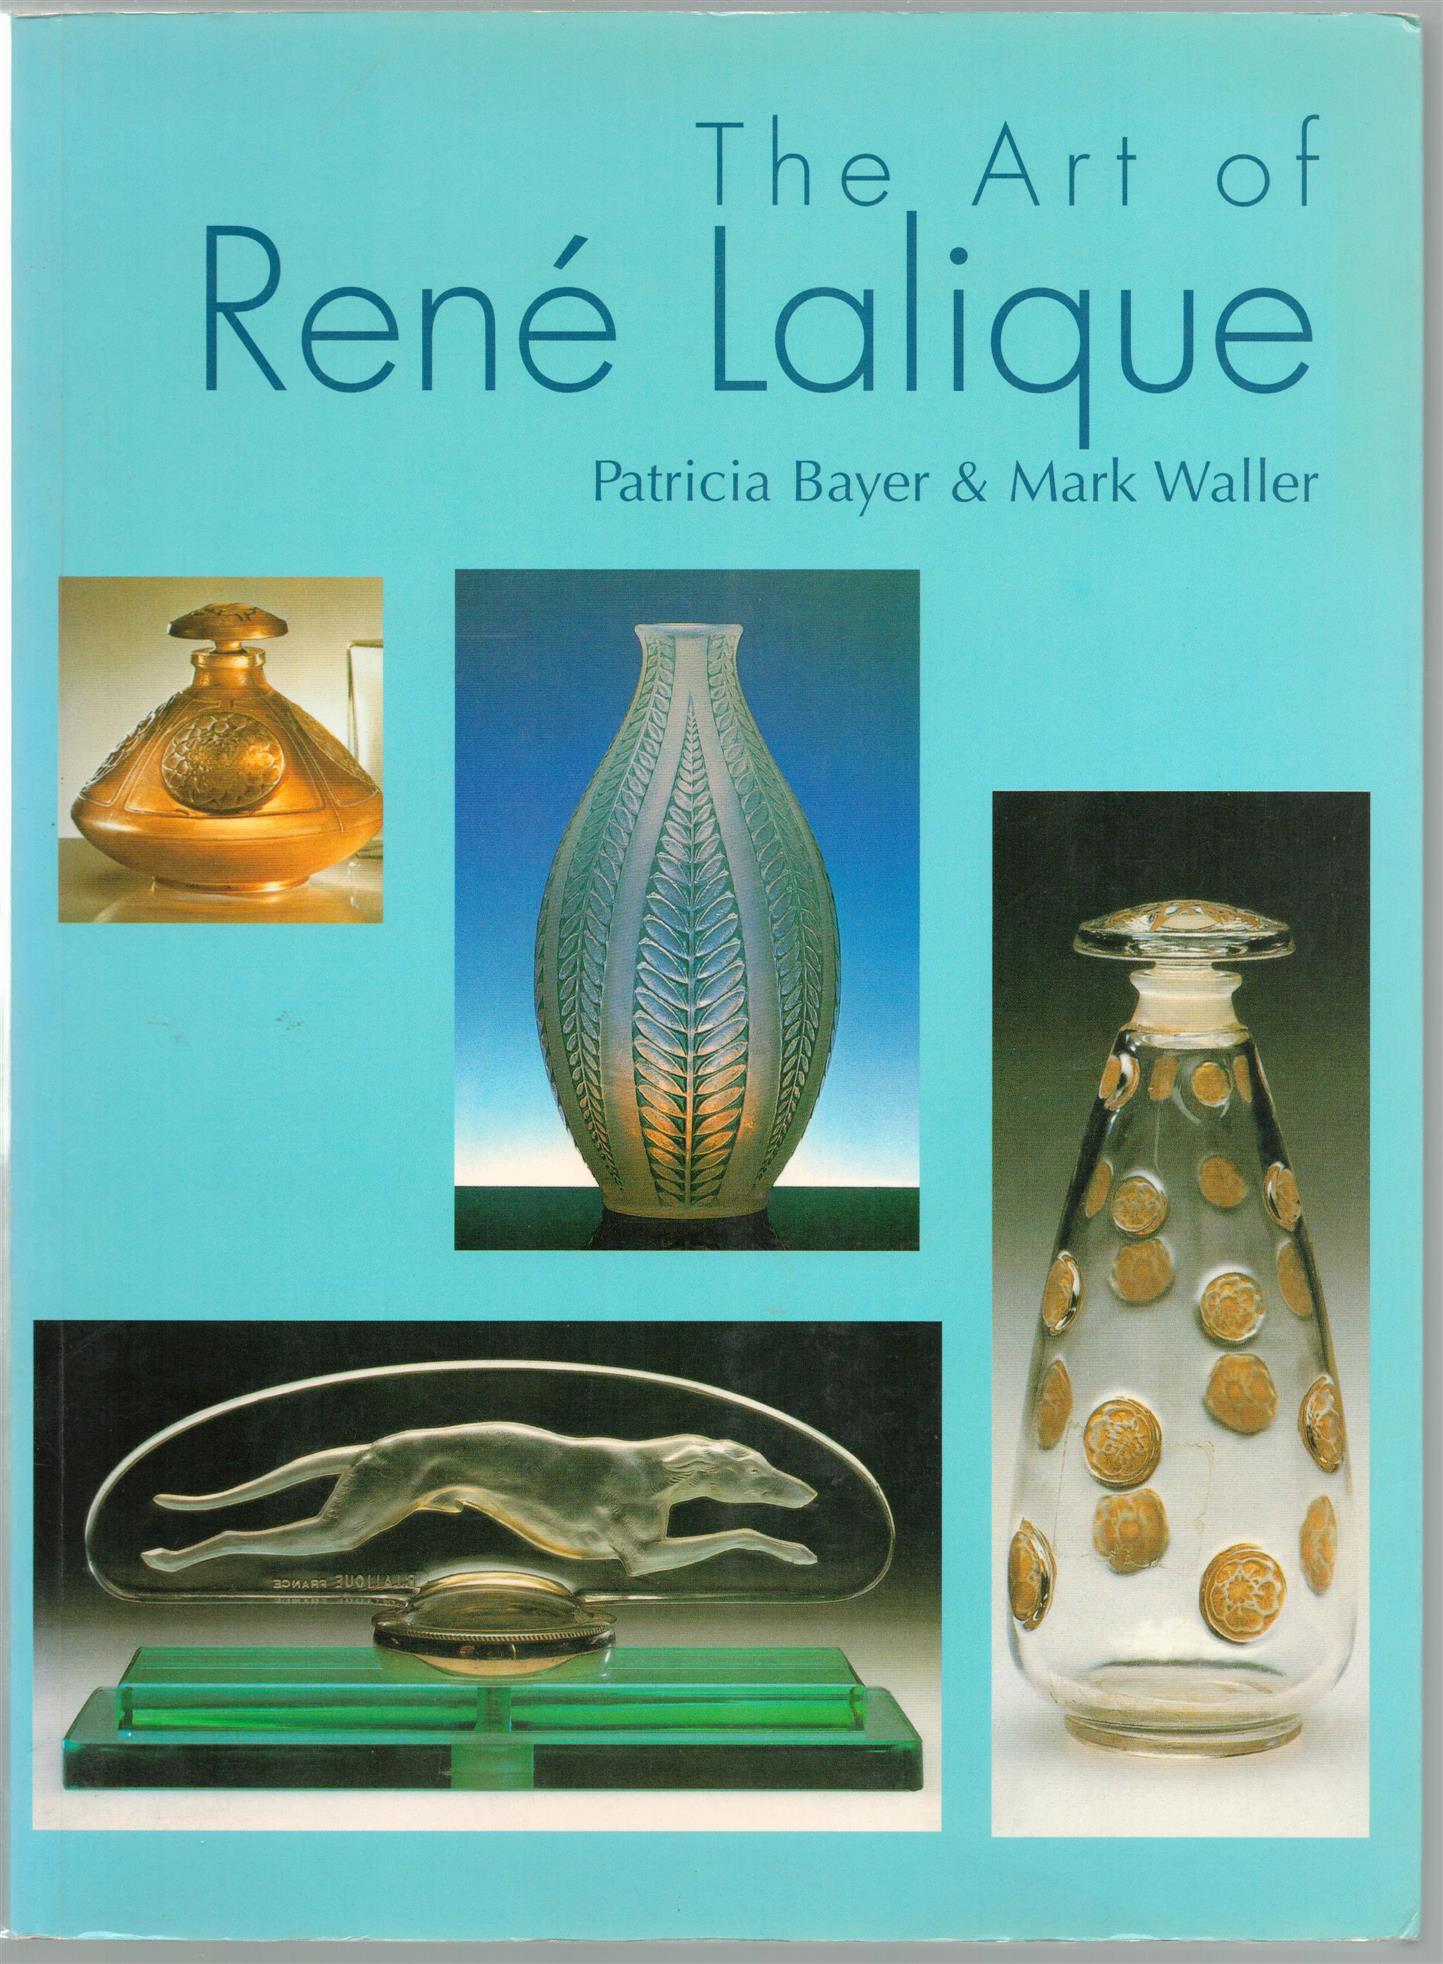 Patricia Bayer - The art of René Lalique